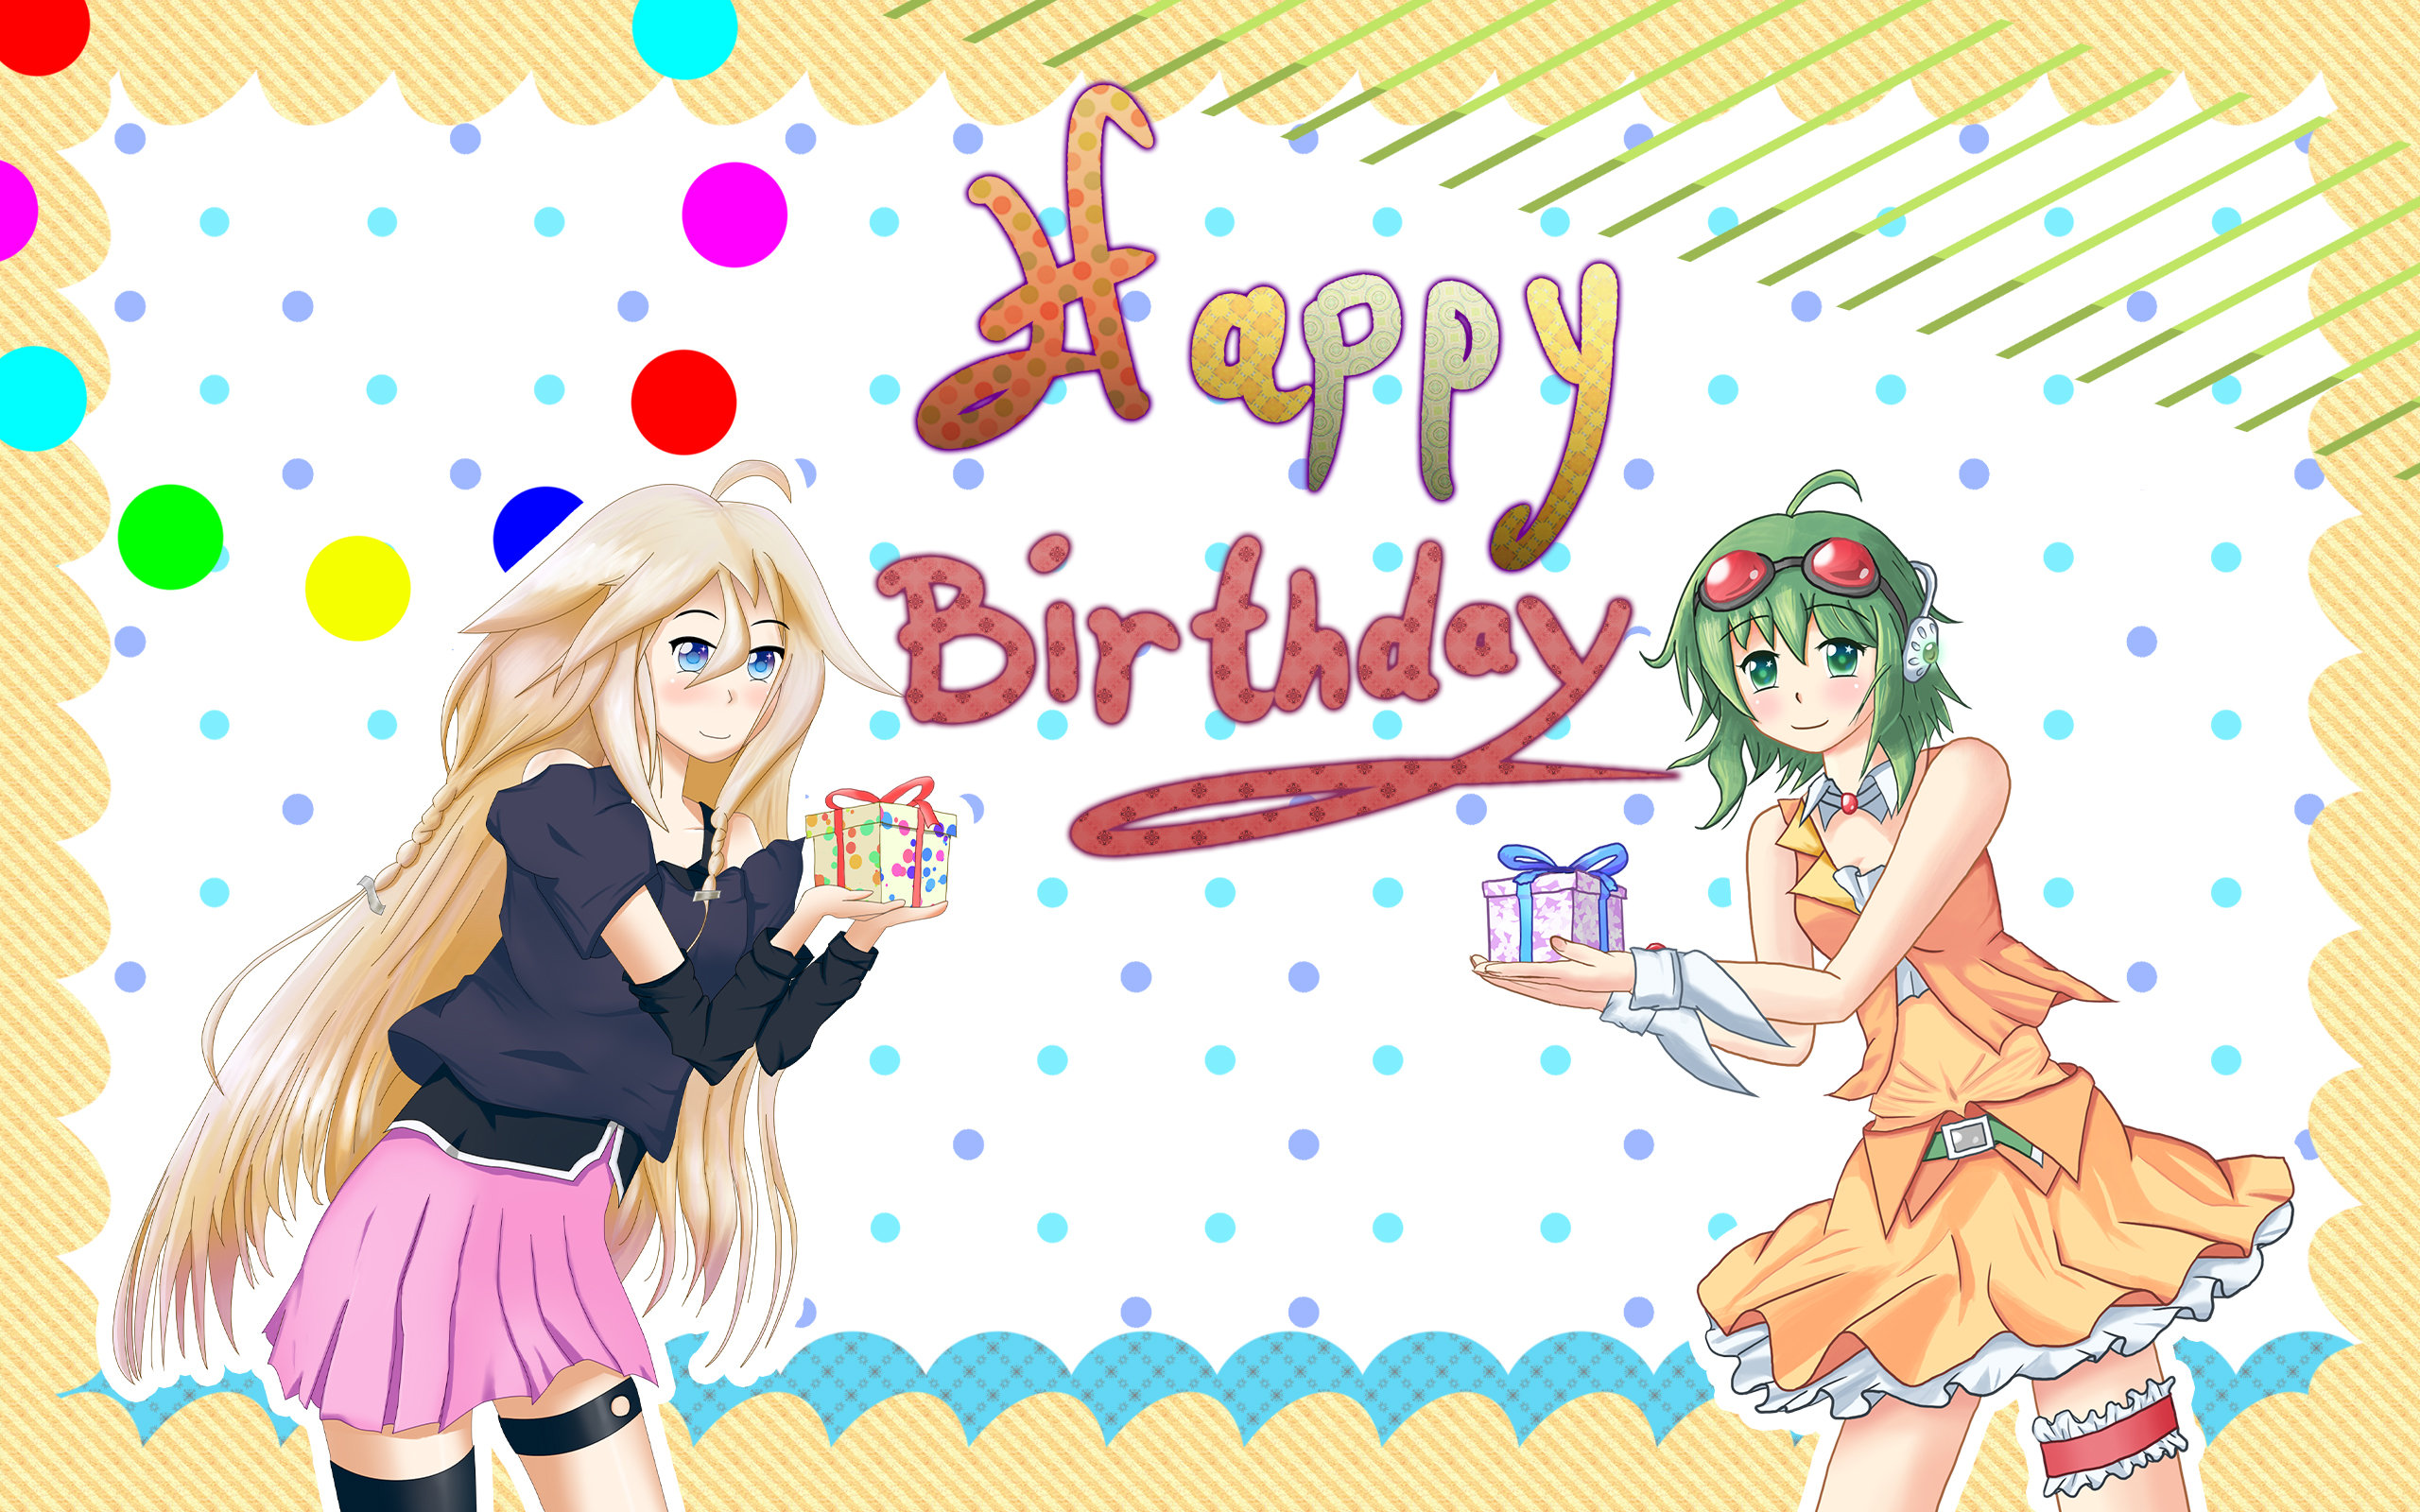 Anime Happy Birthday Animated Picture Codes and Downloads  111116609604124385  Blingeecom